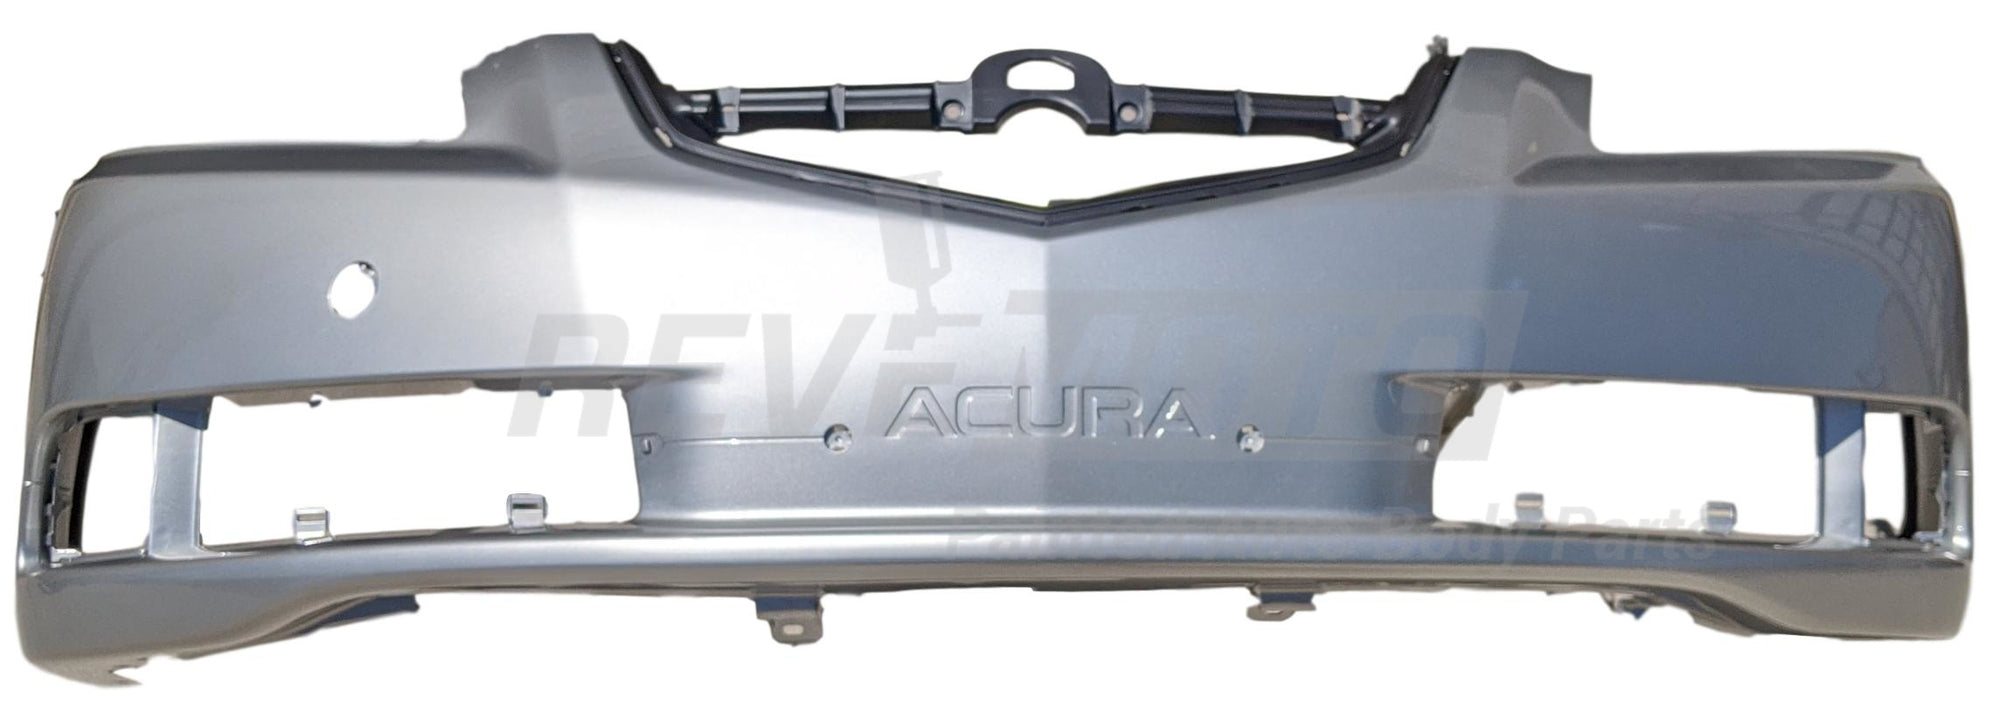 2007 Acura TL : Front Bumper Painted (Type S)